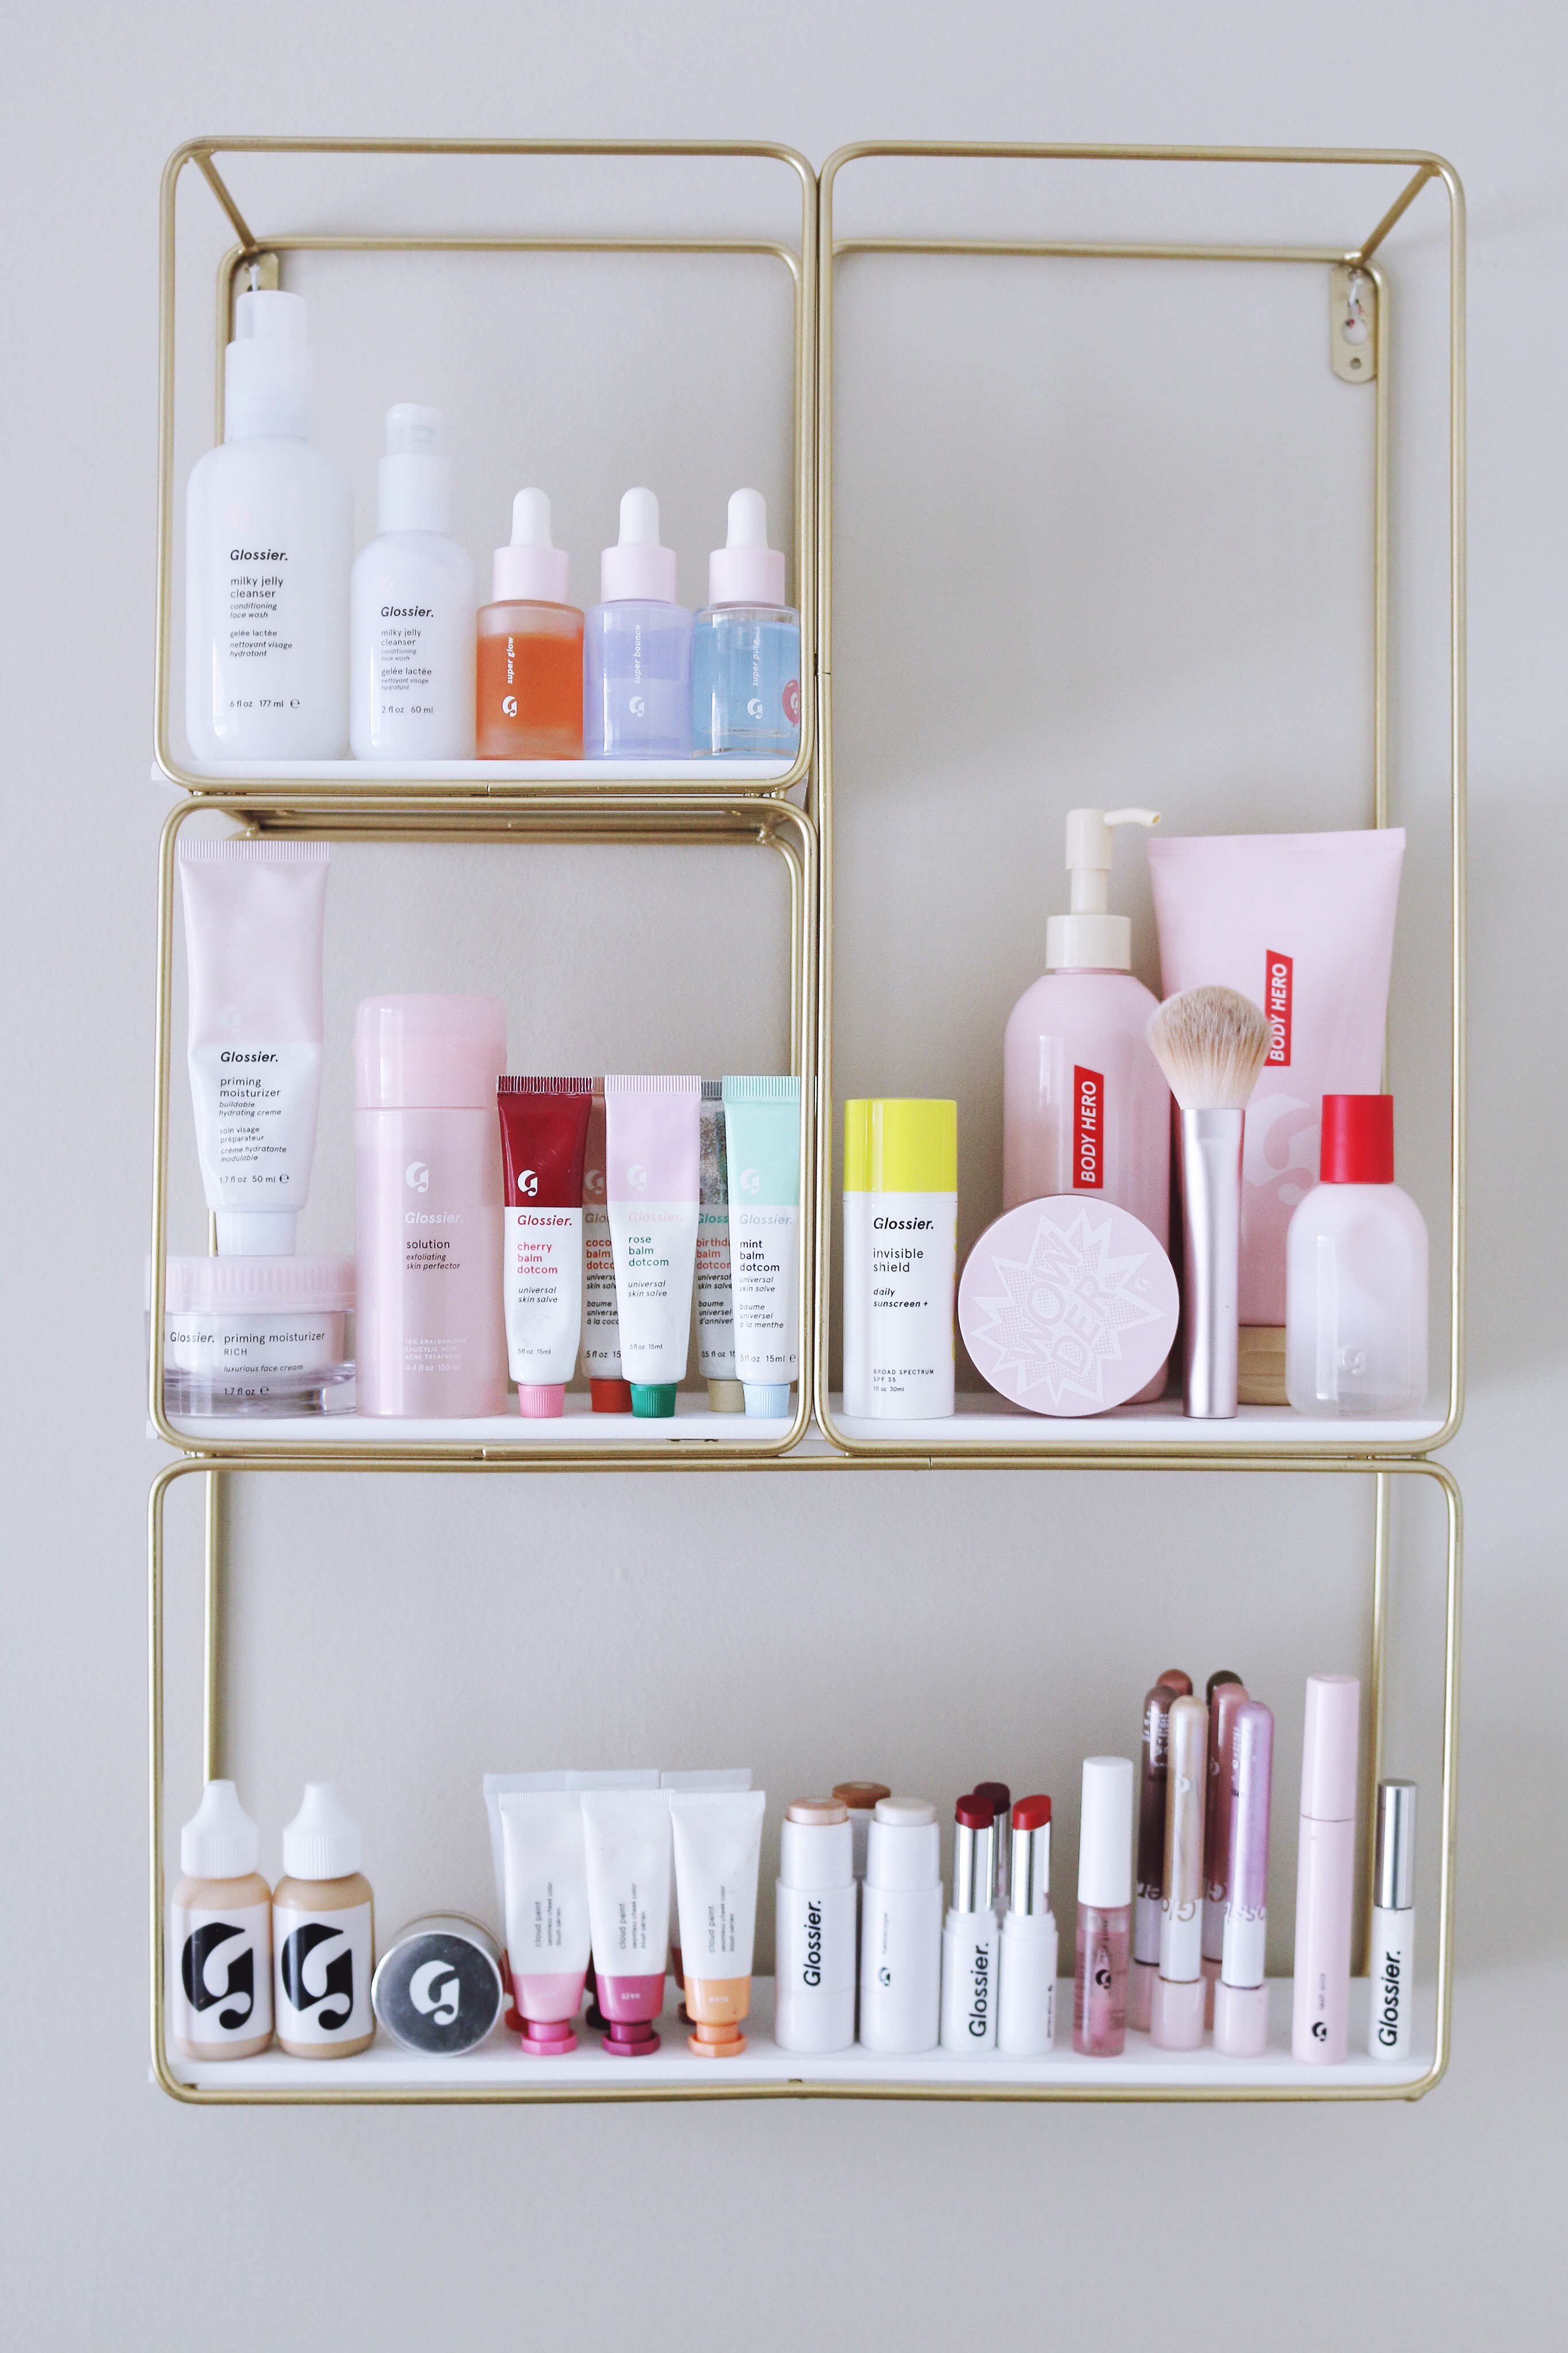 The Best Glossier Makeup Products (& Worst!) - The Beauty Minimalist